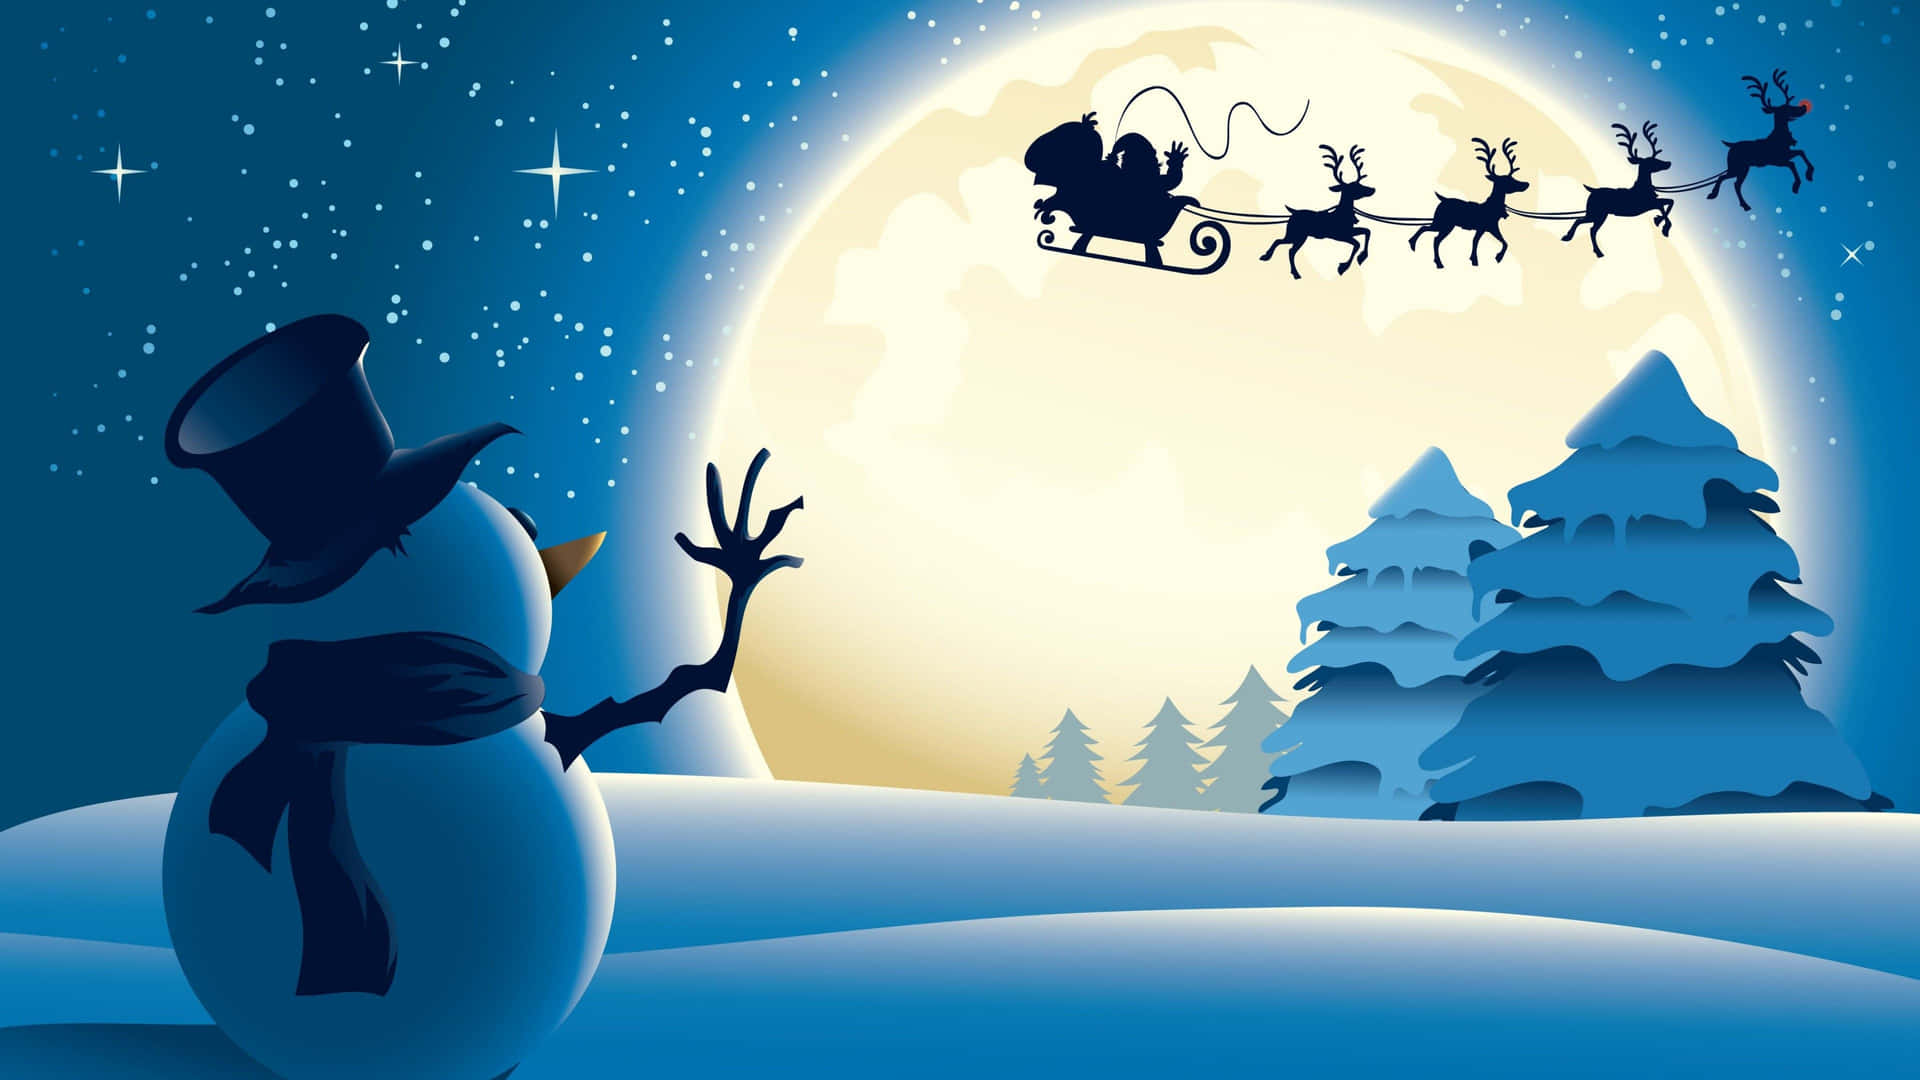 Free Christmas Wallpaper Downloads, [900+] Christmas Wallpapers for FREE |  